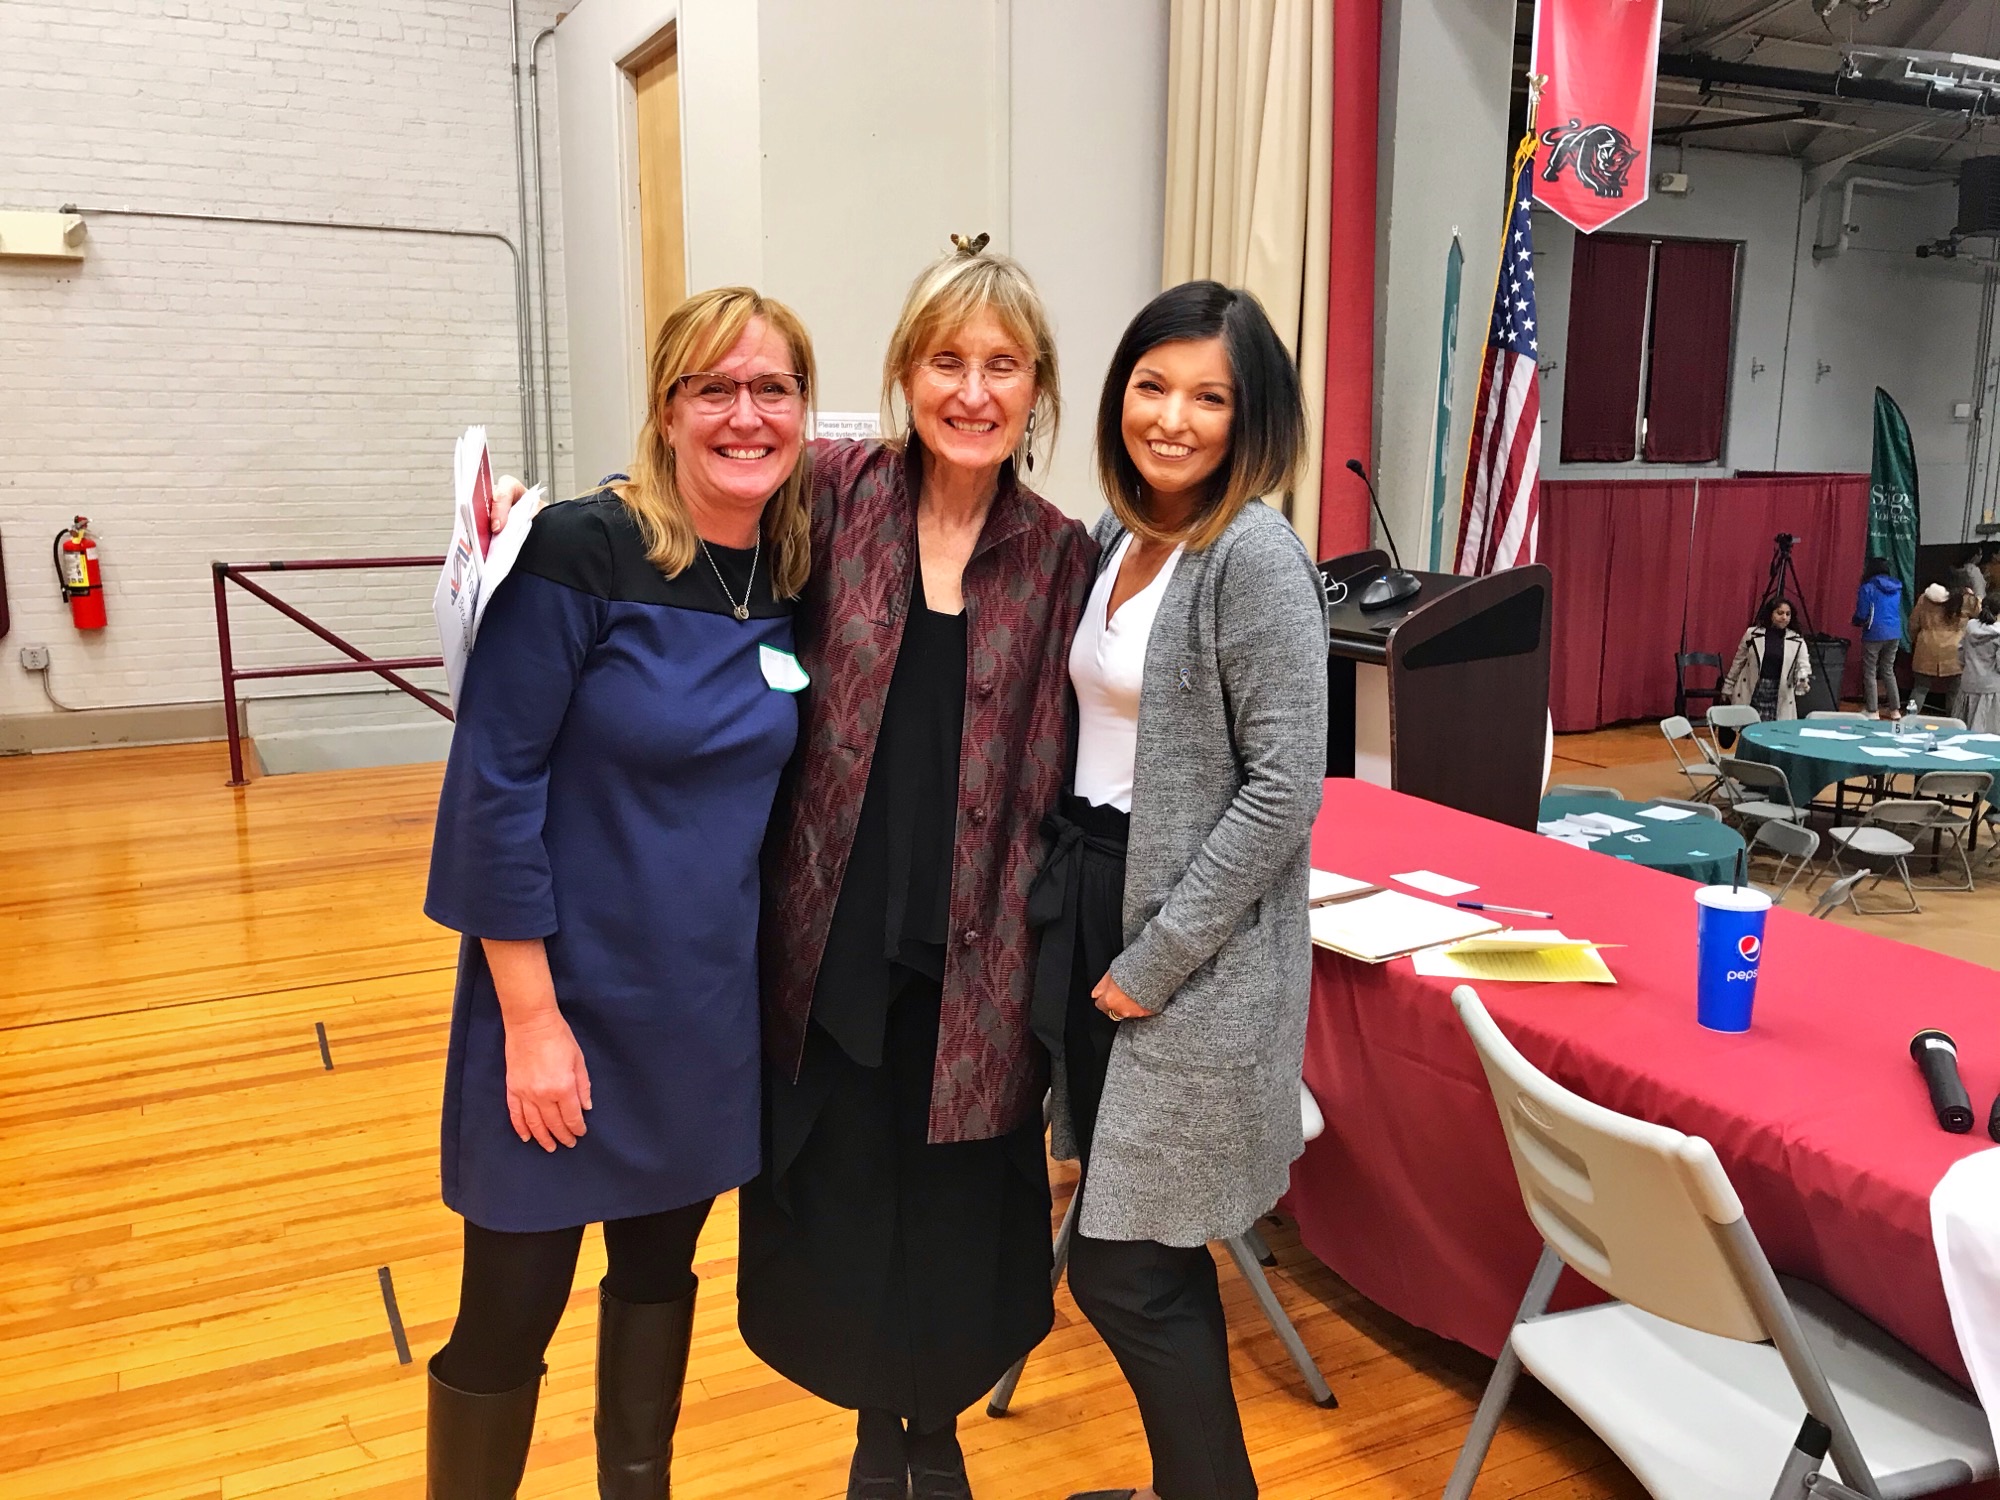 Amy (right) attending the Steffans Foundation's Interprofessional Education Event, where she was a keynote speaker